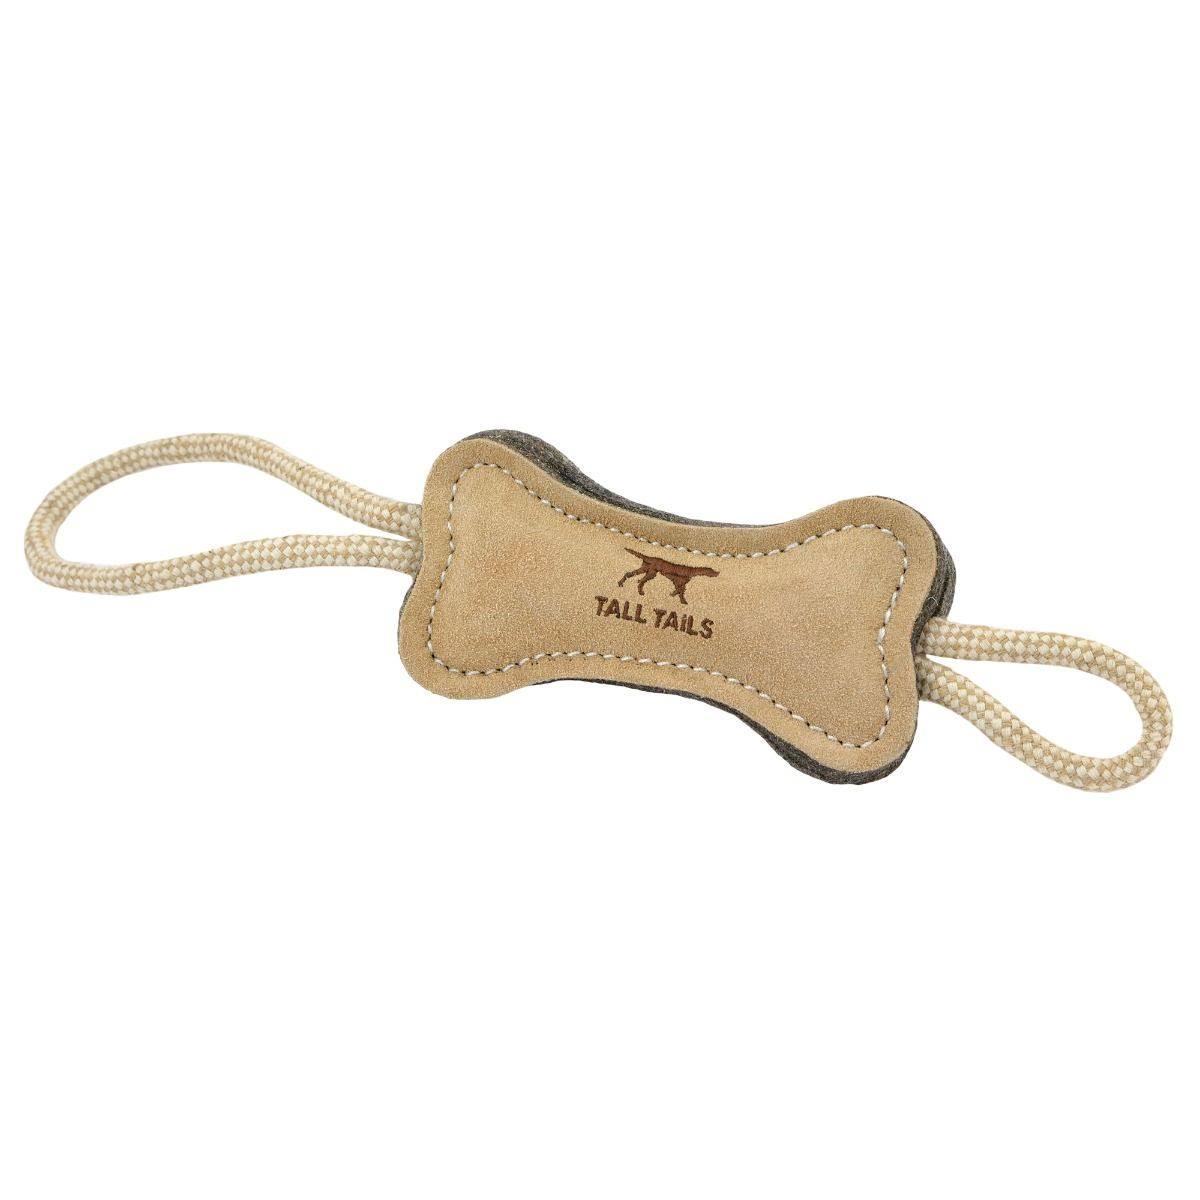 Tall Tails Natural Leather Bone Tug Dog Toy, 16-in